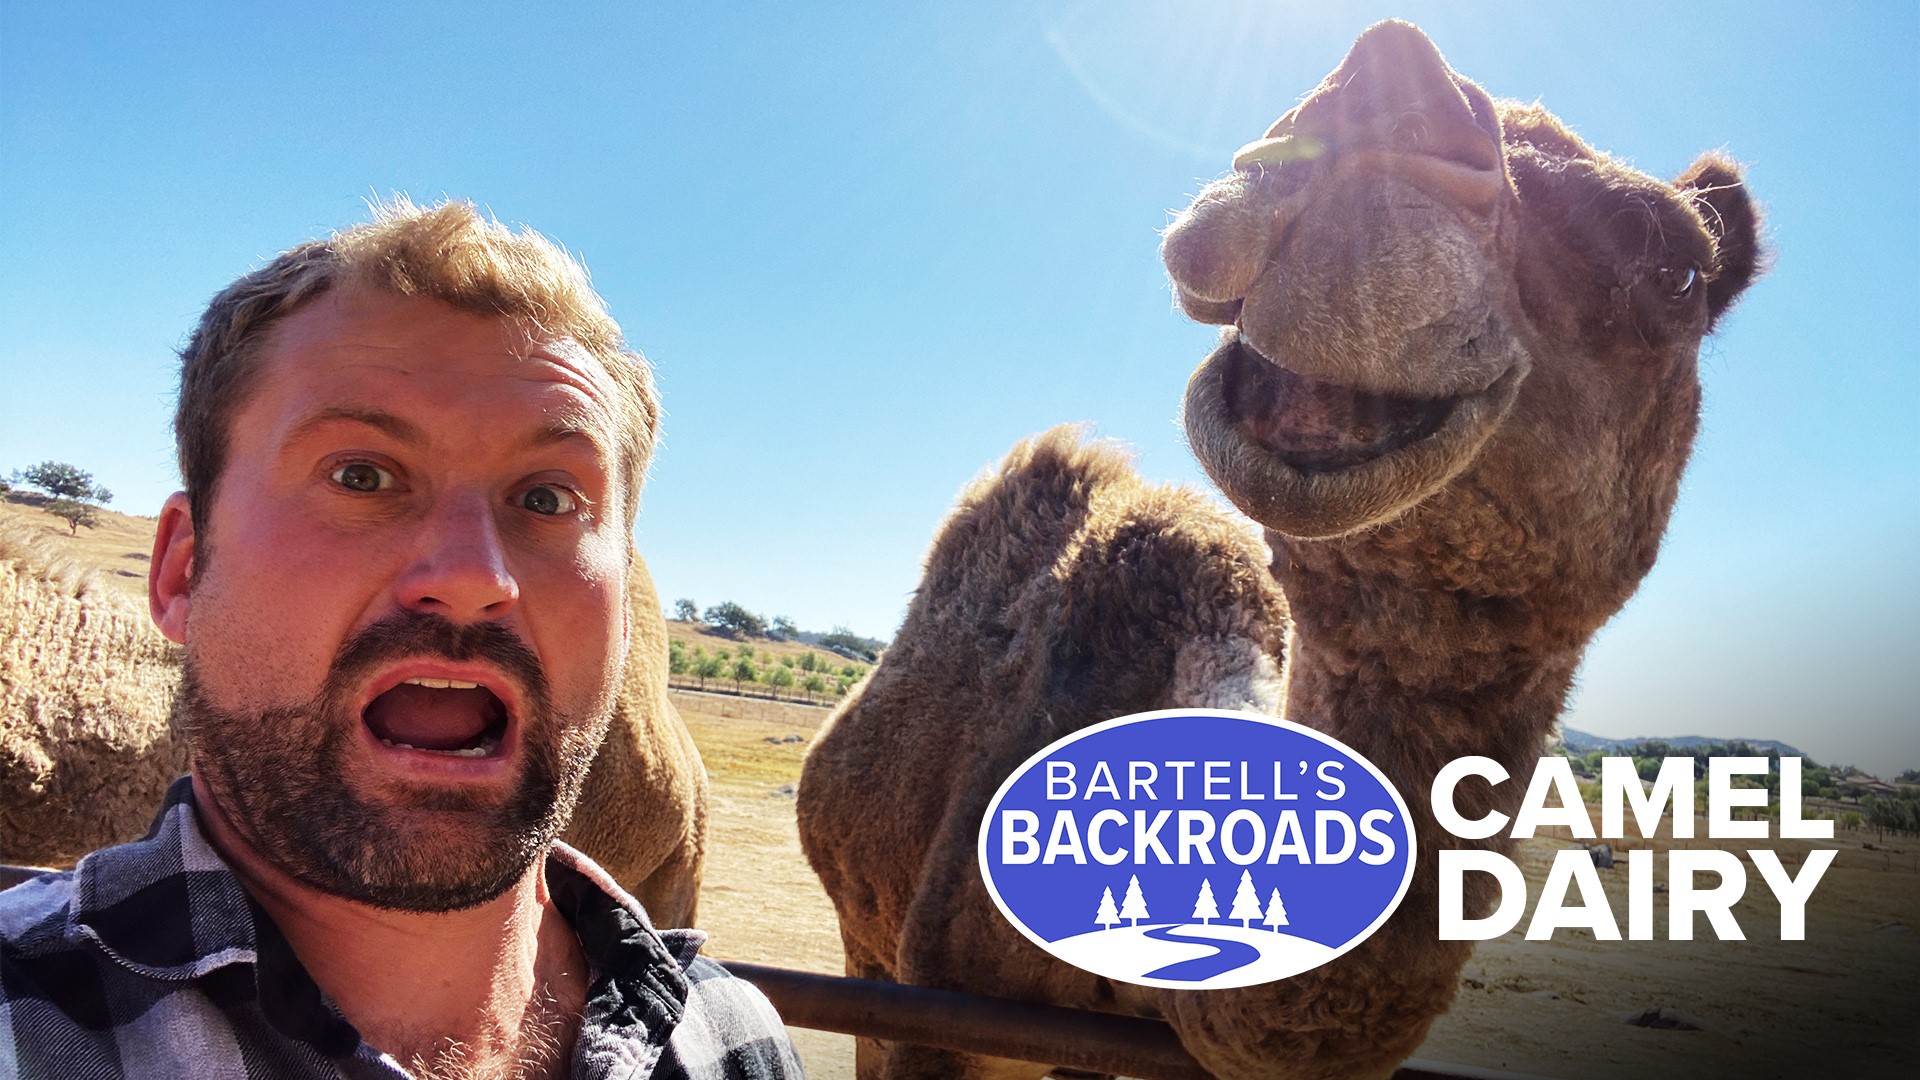 Ride along as John Bartell takes a road trip to the Oasis Camel Dairy for their monthly visitors day, and makes a few new furry friends.